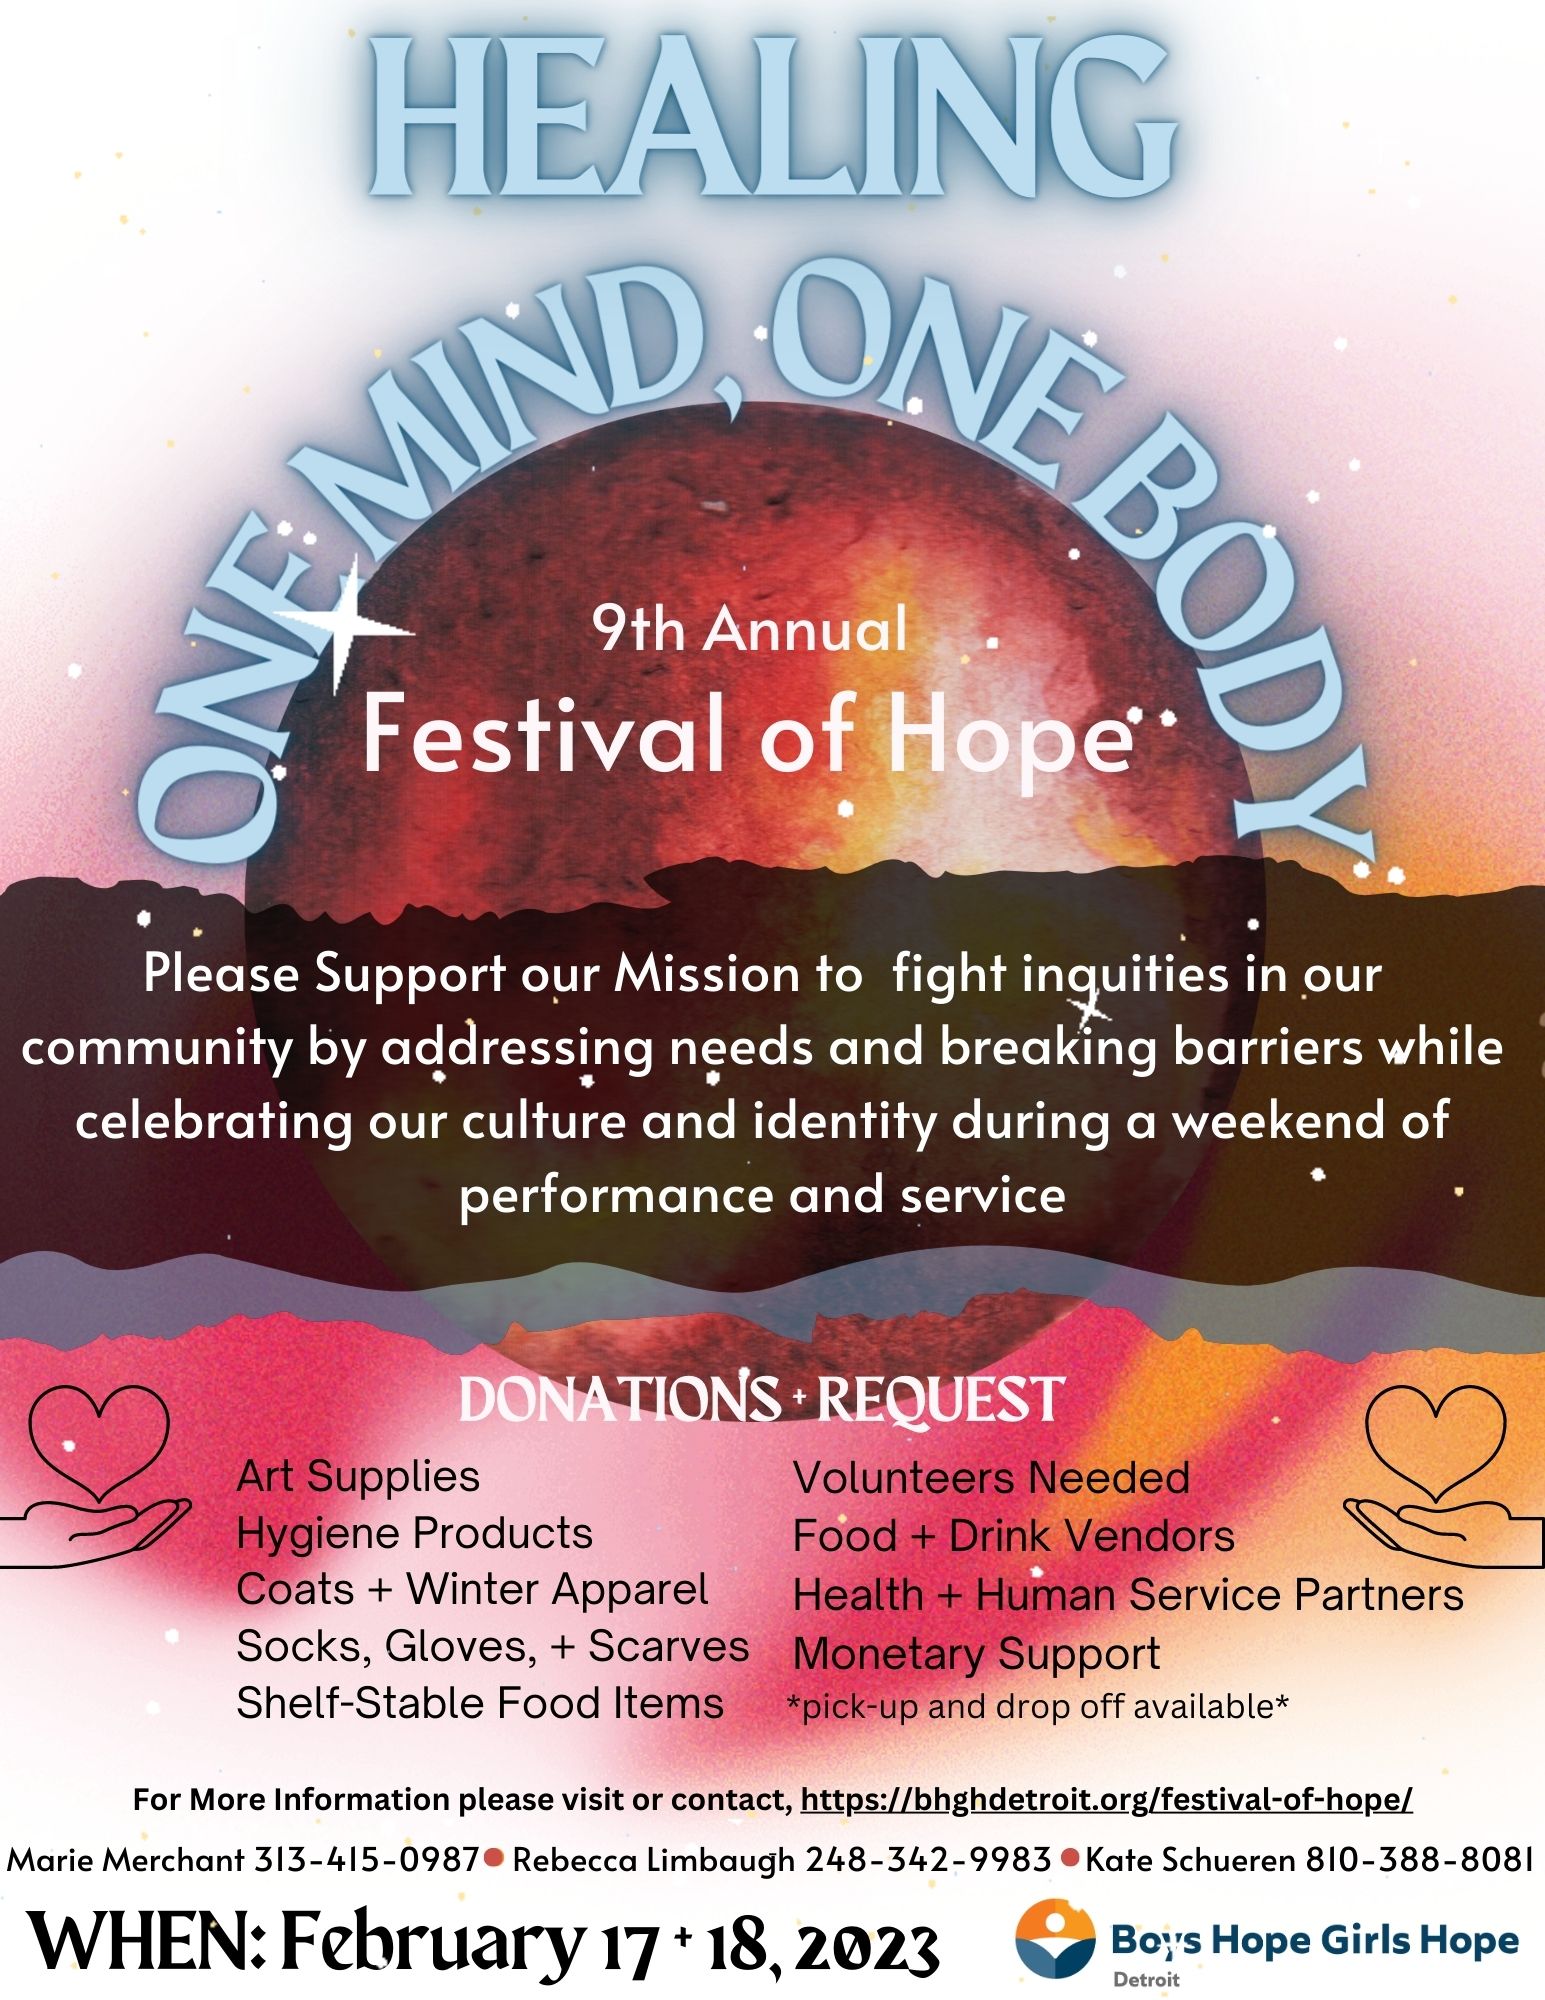 "Healing, One Mind, One Body" 9th Annual Festival of Hope